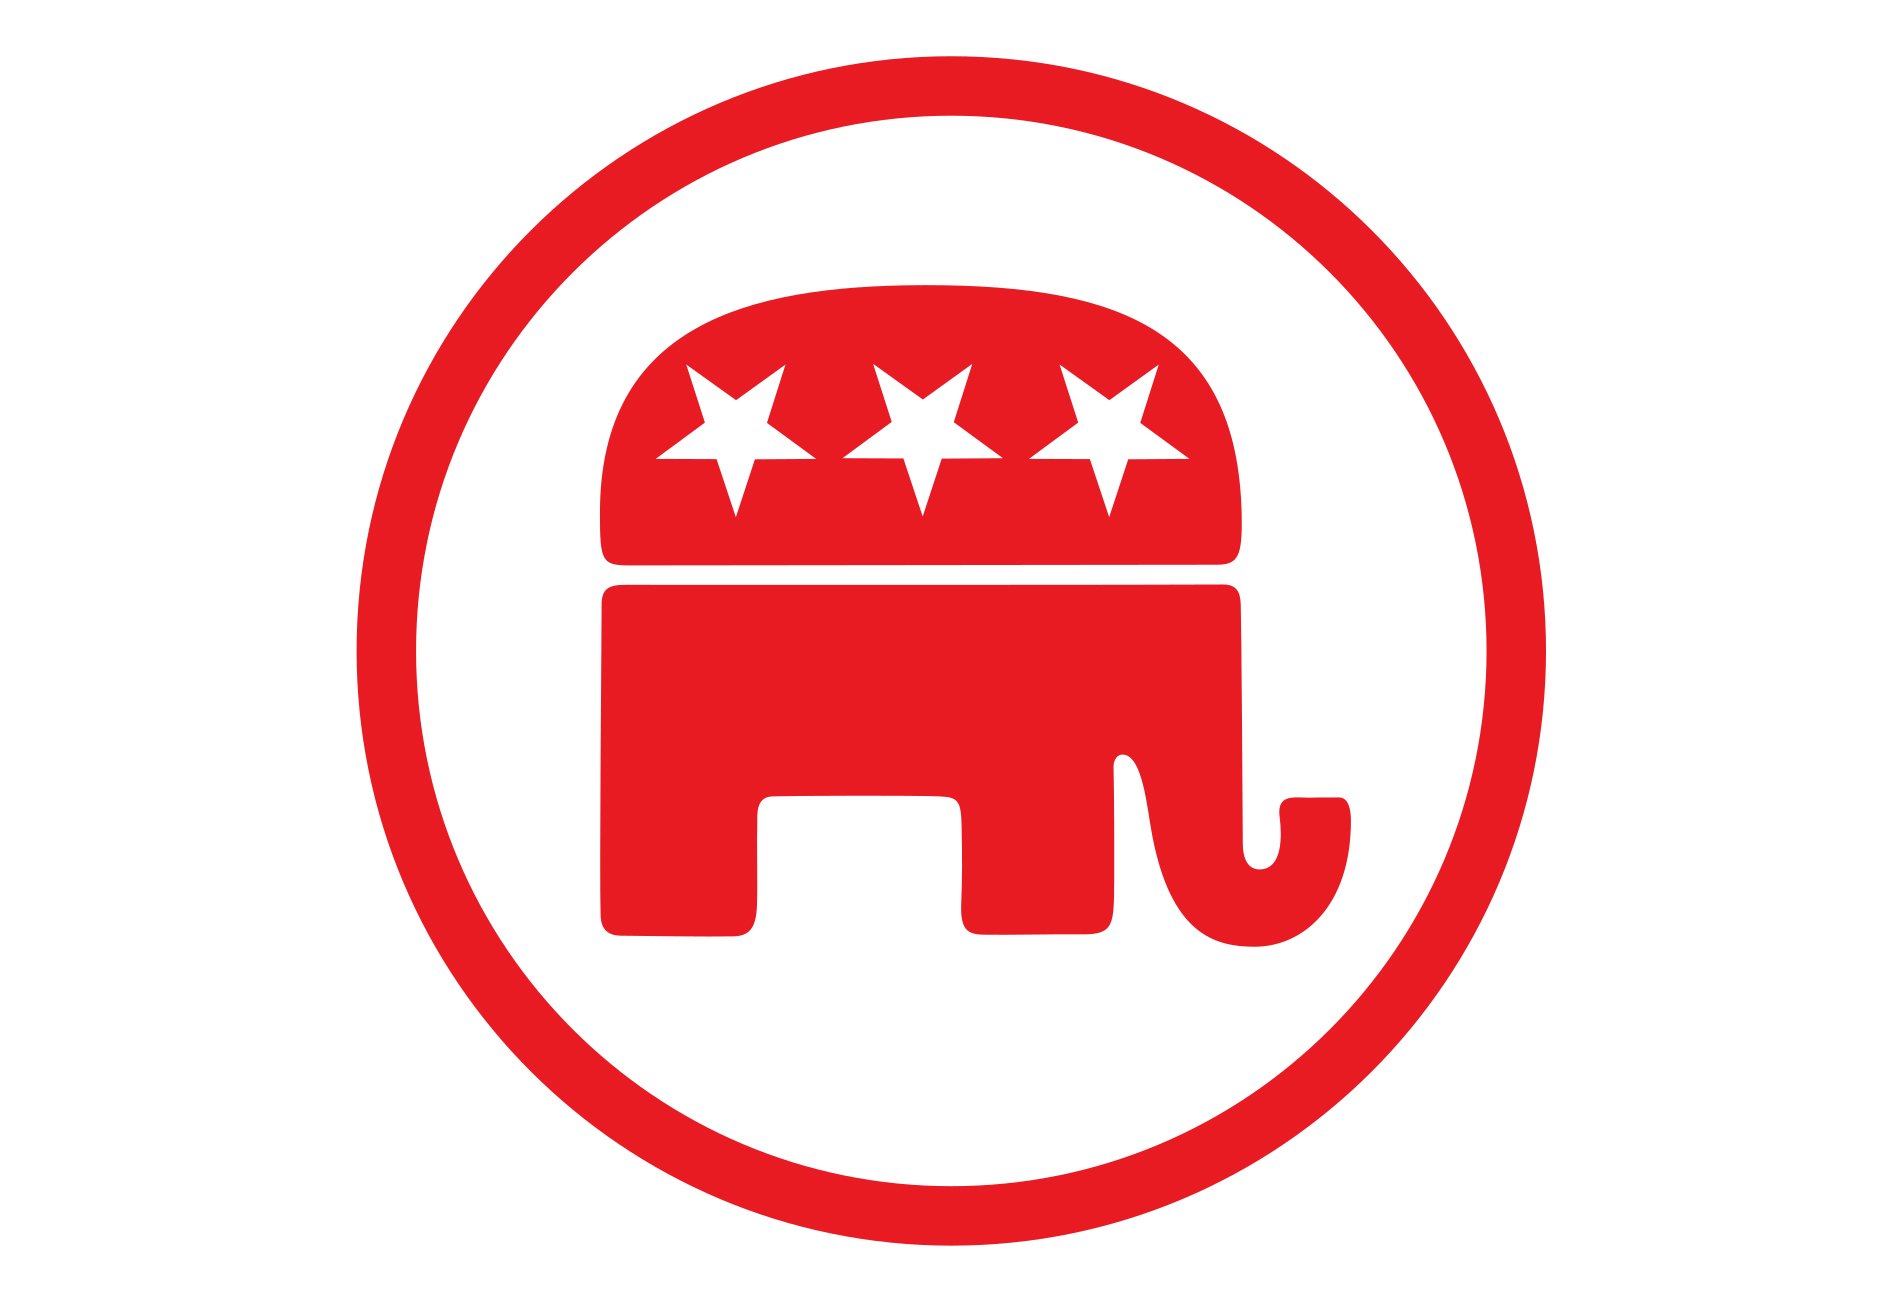 Republican Logo, Republican Symbol, Meaning, History and Evolution